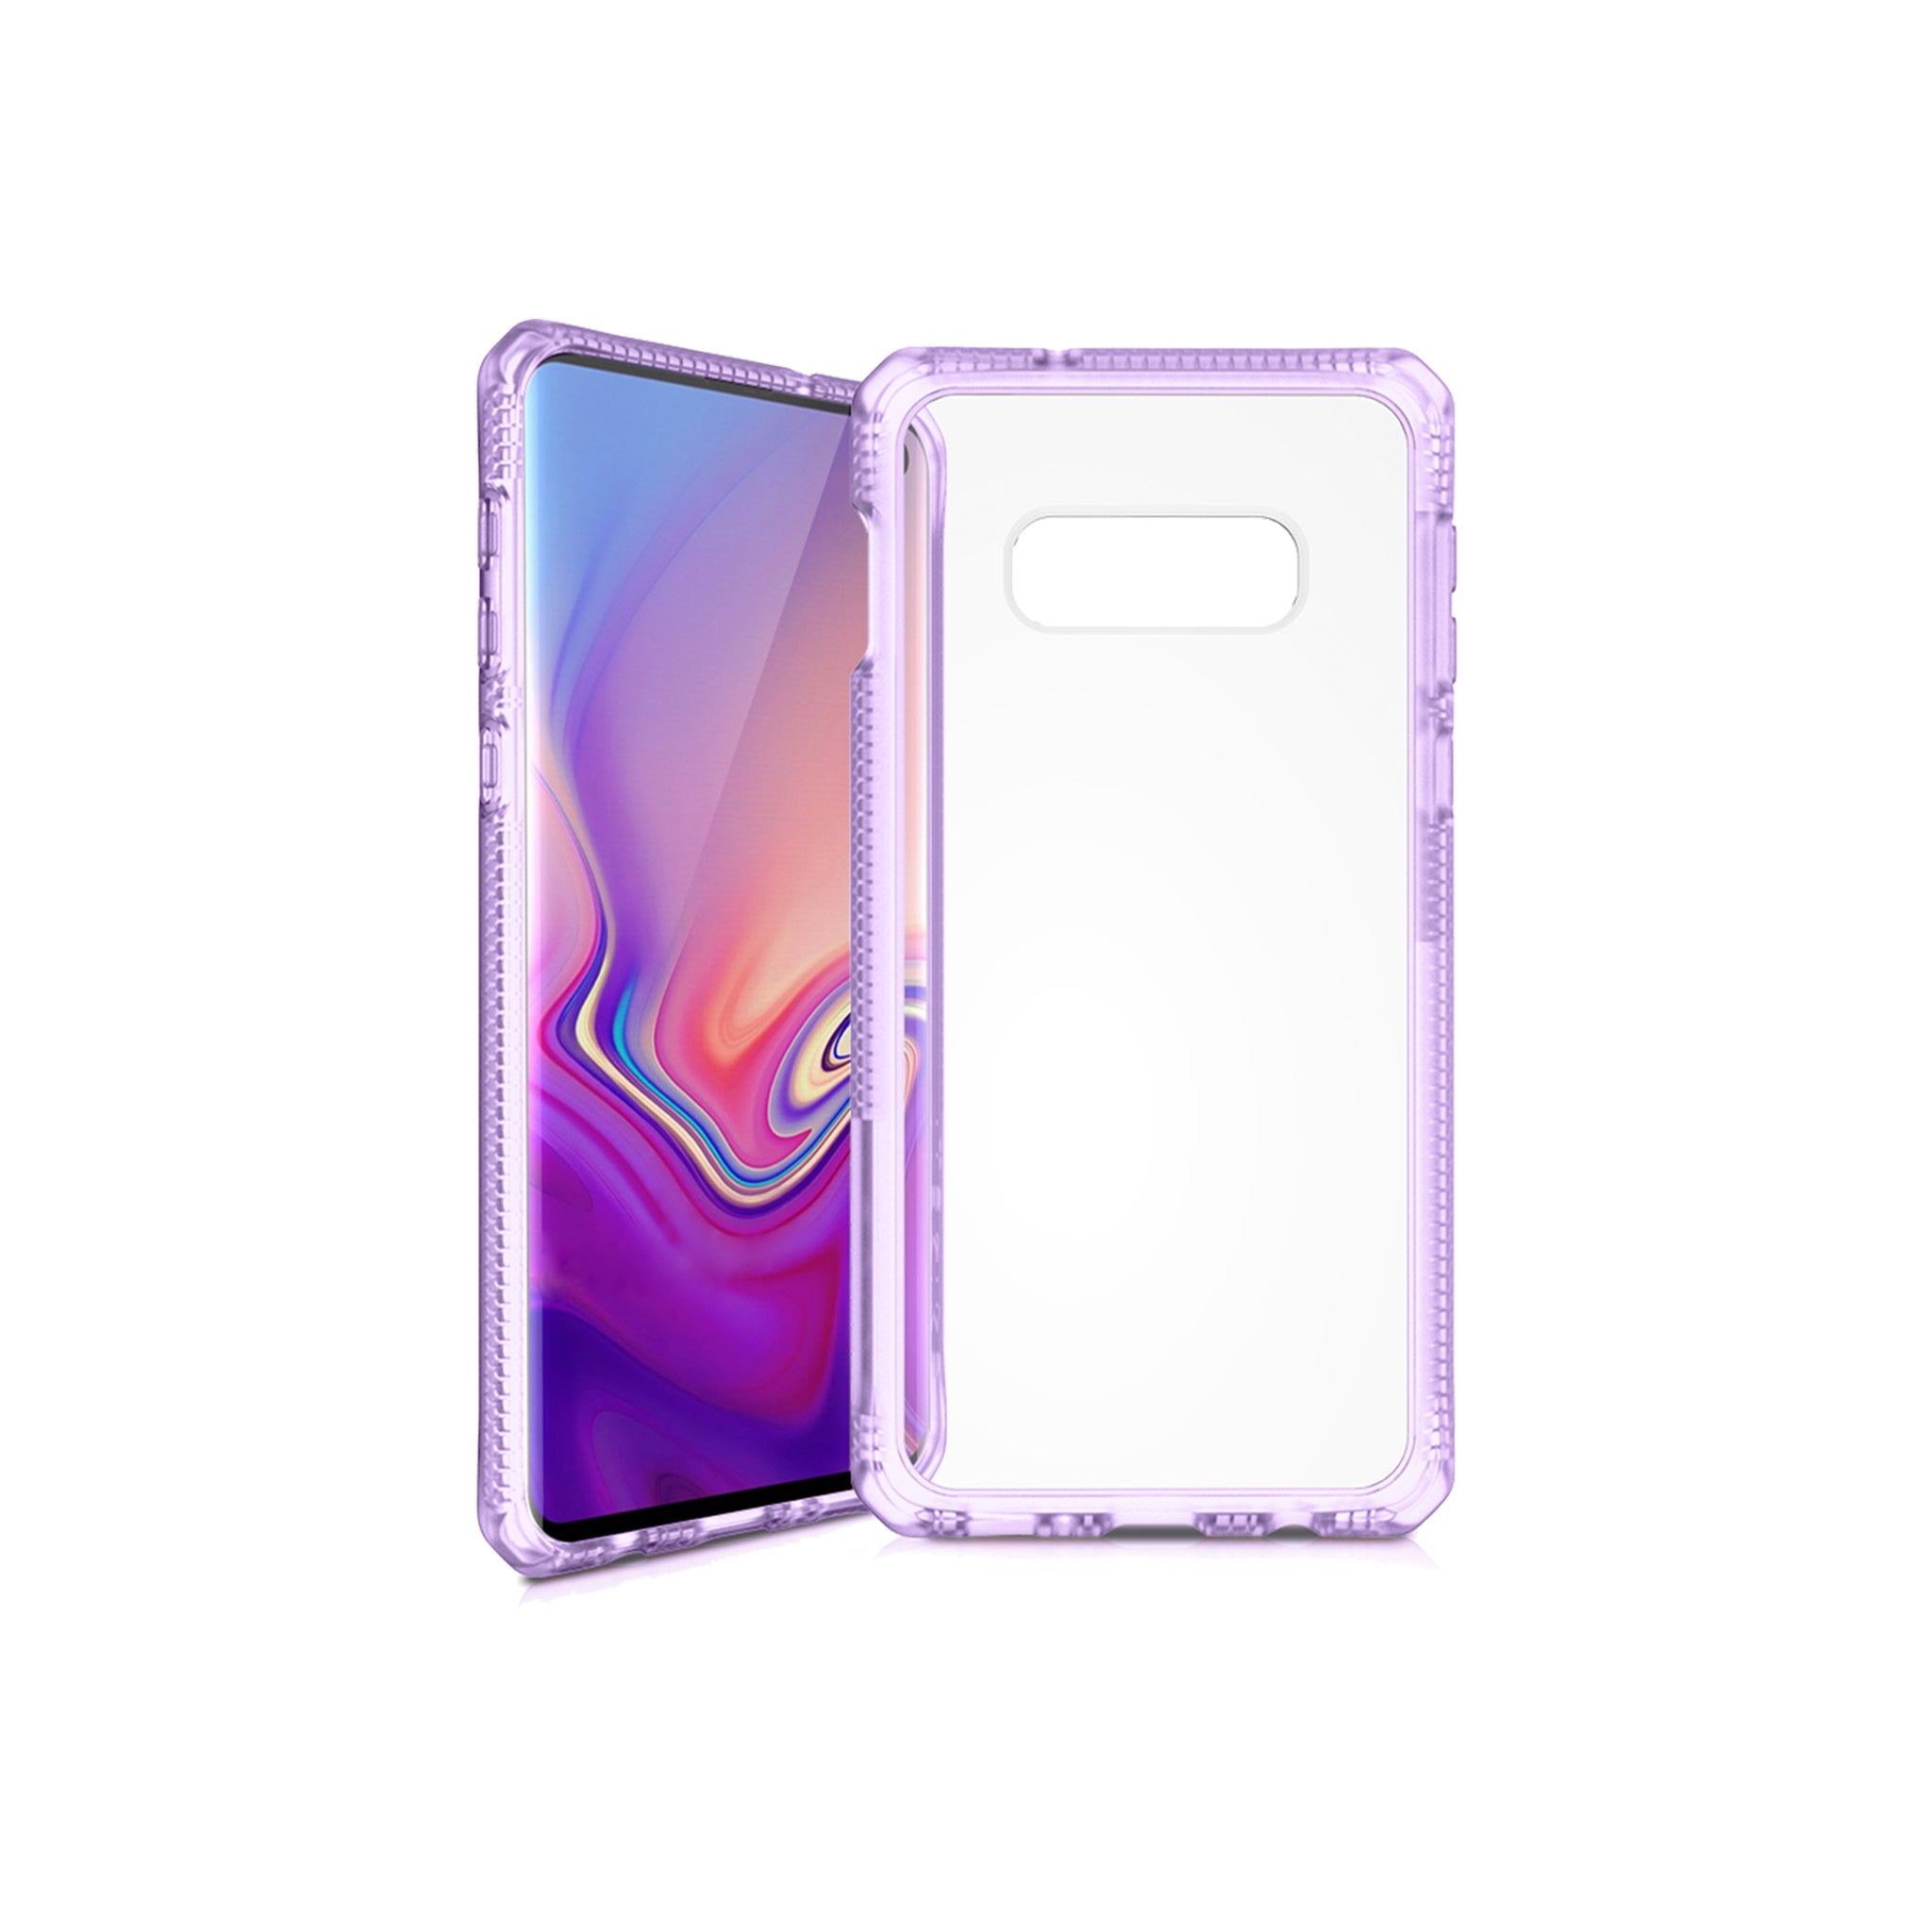 Itskins - Hybrid Frost Mkii Case For Samsung Galaxy S10e - Light Purple And Transparent